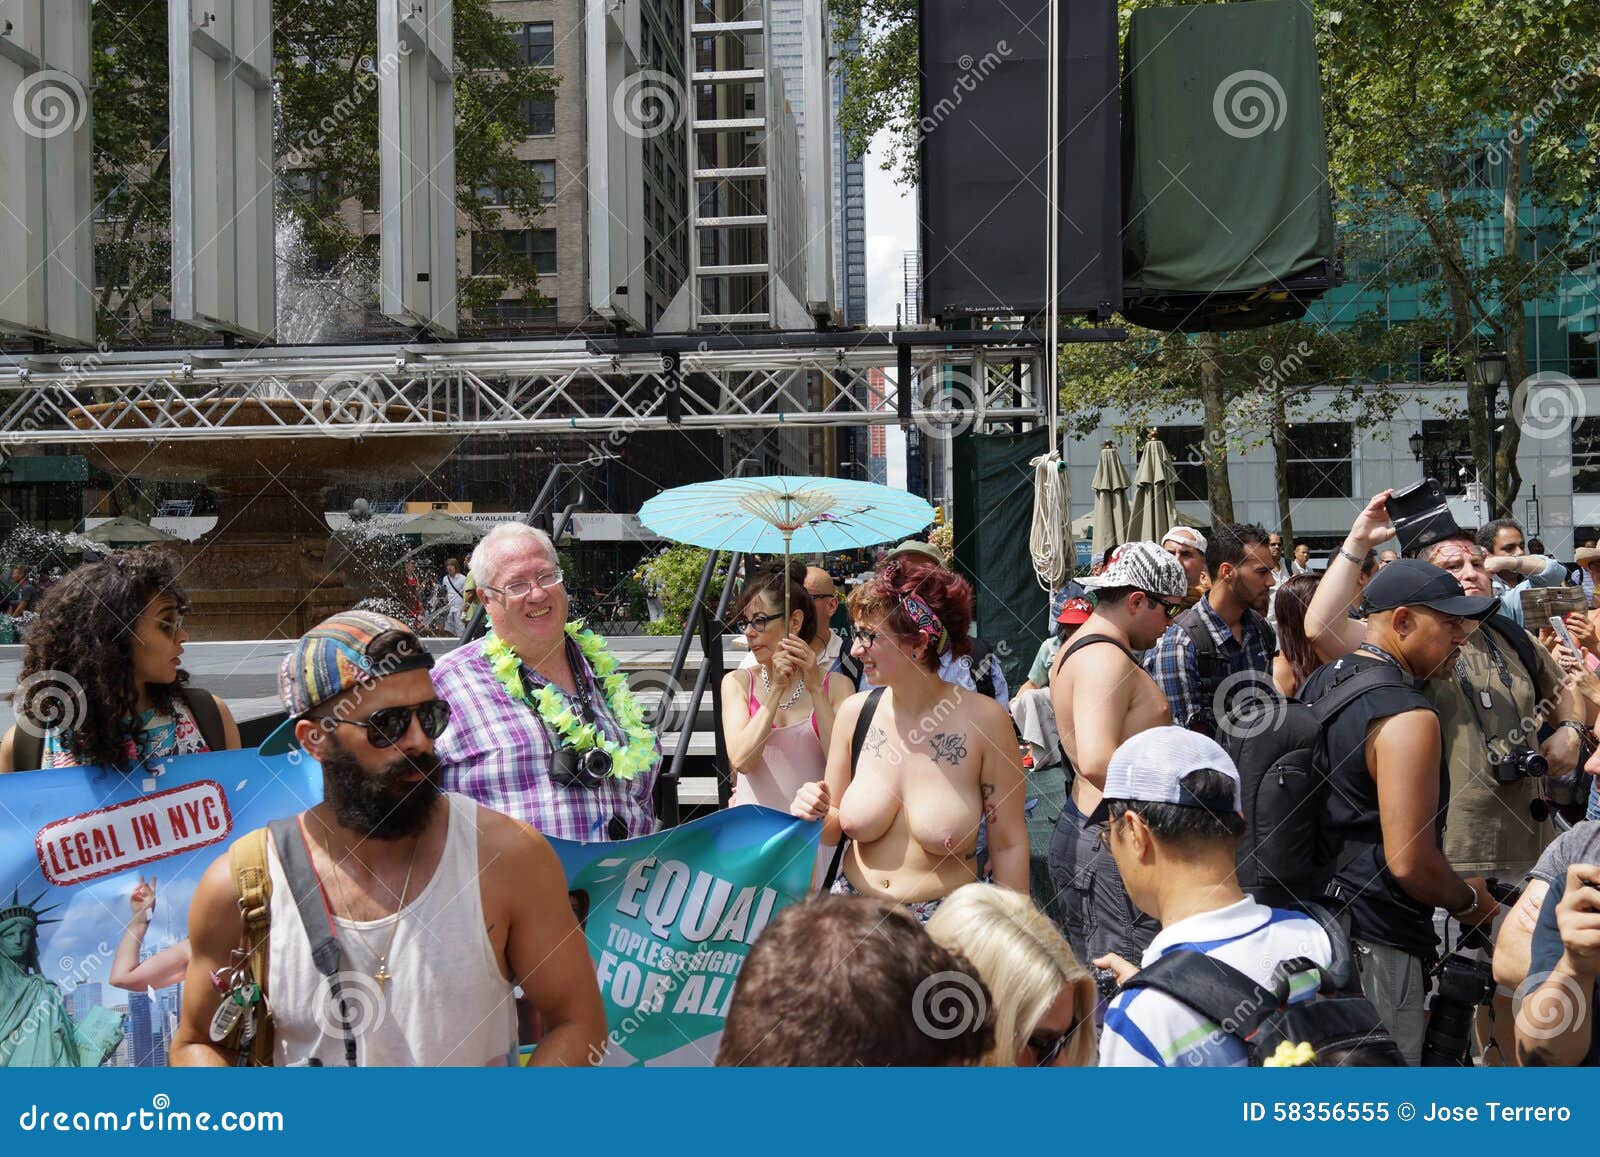 chris kneer add go topless day in nyc photo